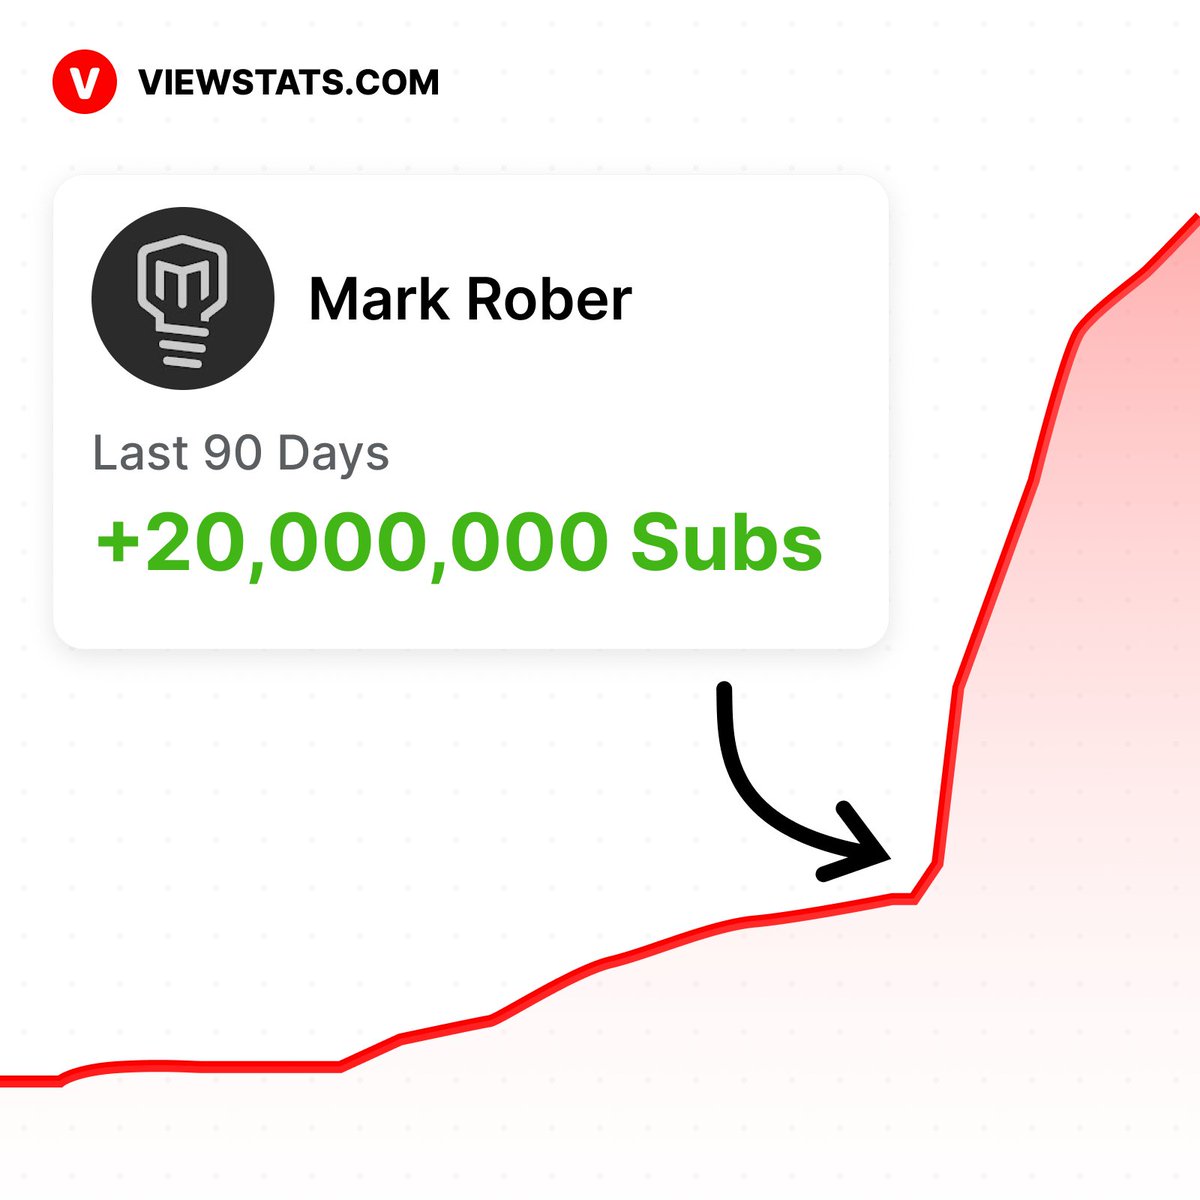 Here’s how @MarkRober went from 29,900,000 to 50,000,000 in 3 months